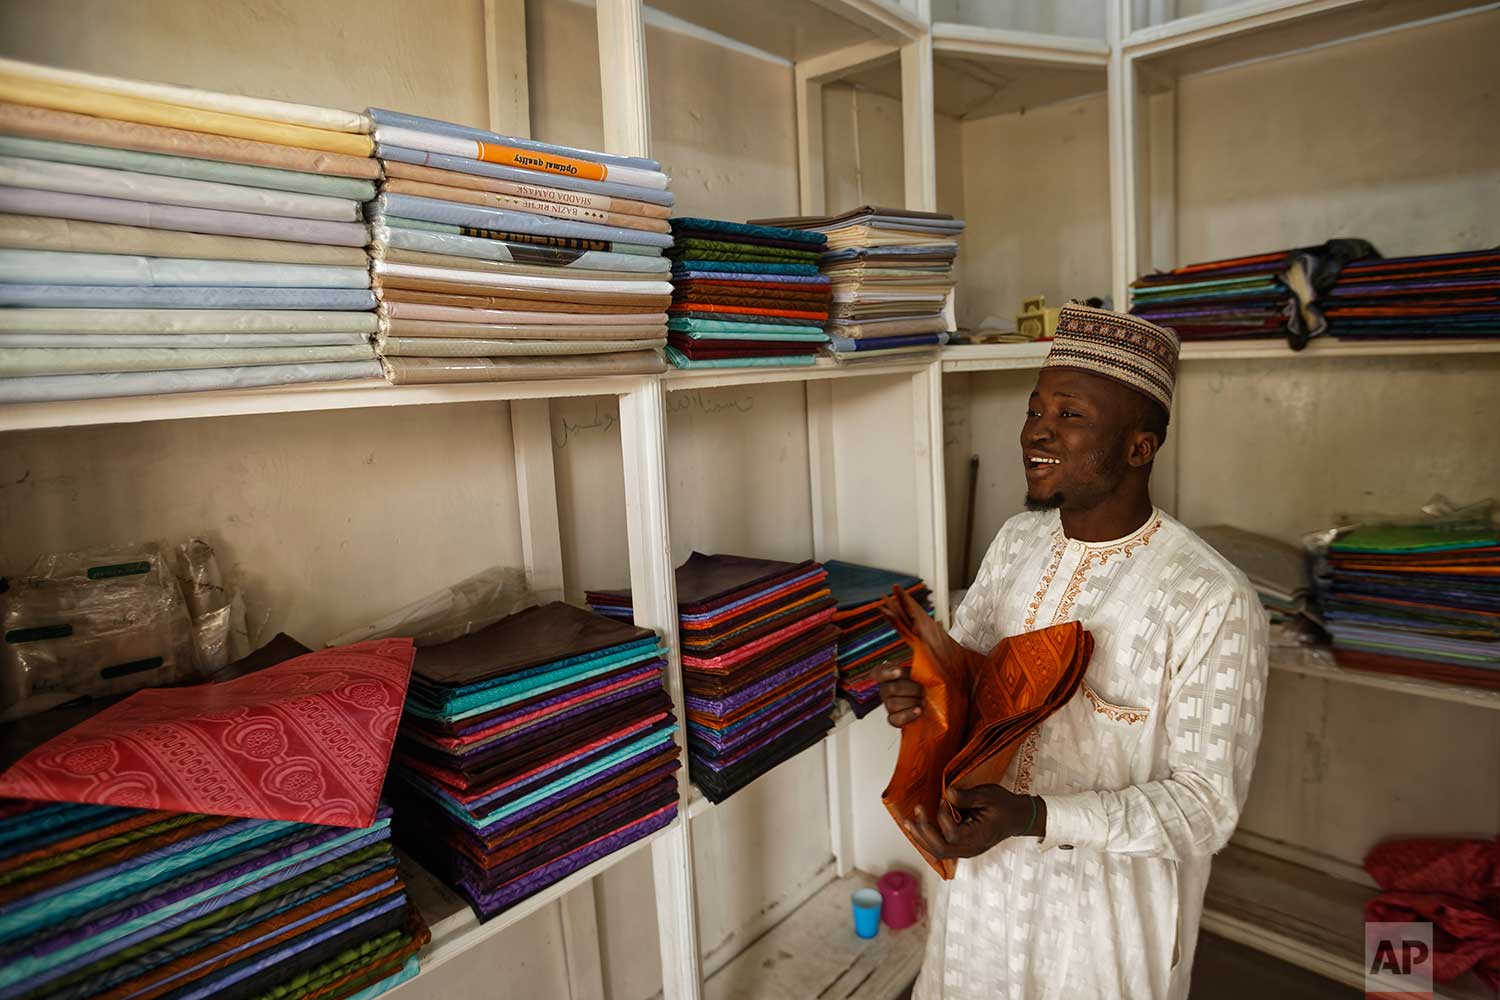  In this photo taken Tuesday, Feb. 19, 2019, a shopkeeper sells dyed fabric made in China at his stall in the market in Kano, northern Nigeria. (AP Photo/Ben Curtis) 